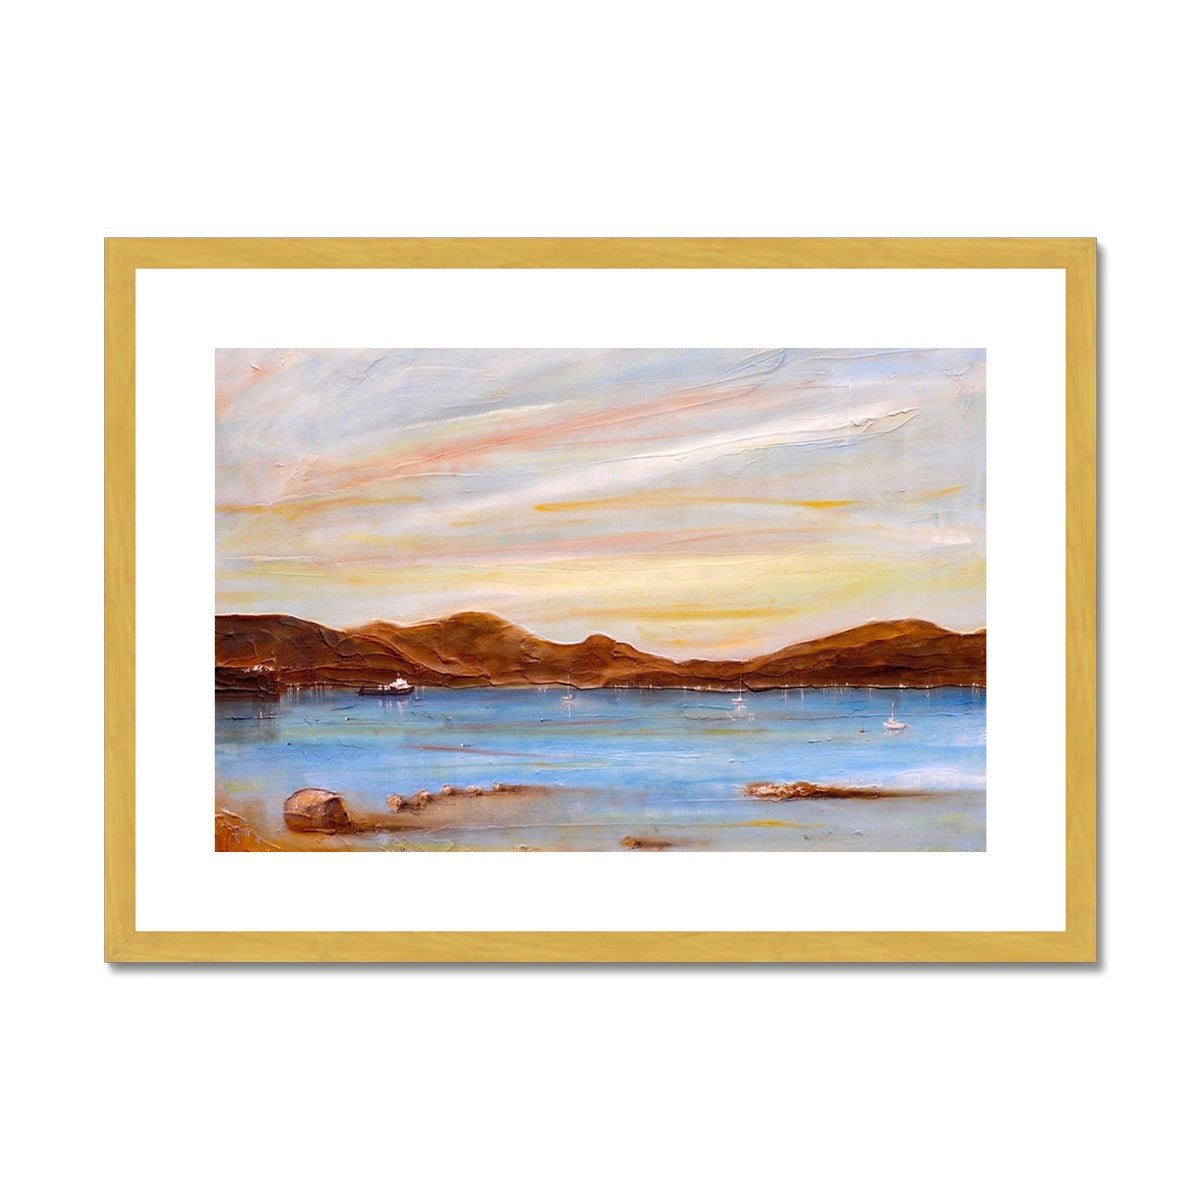 The Last Ferry To Dunoon Painting | Antique Framed & Mounted Prints From Scotland-Antique Framed & Mounted Prints-River Clyde Art Gallery-A2 Landscape-Gold Frame-Paintings, Prints, Homeware, Art Gifts From Scotland By Scottish Artist Kevin Hunter